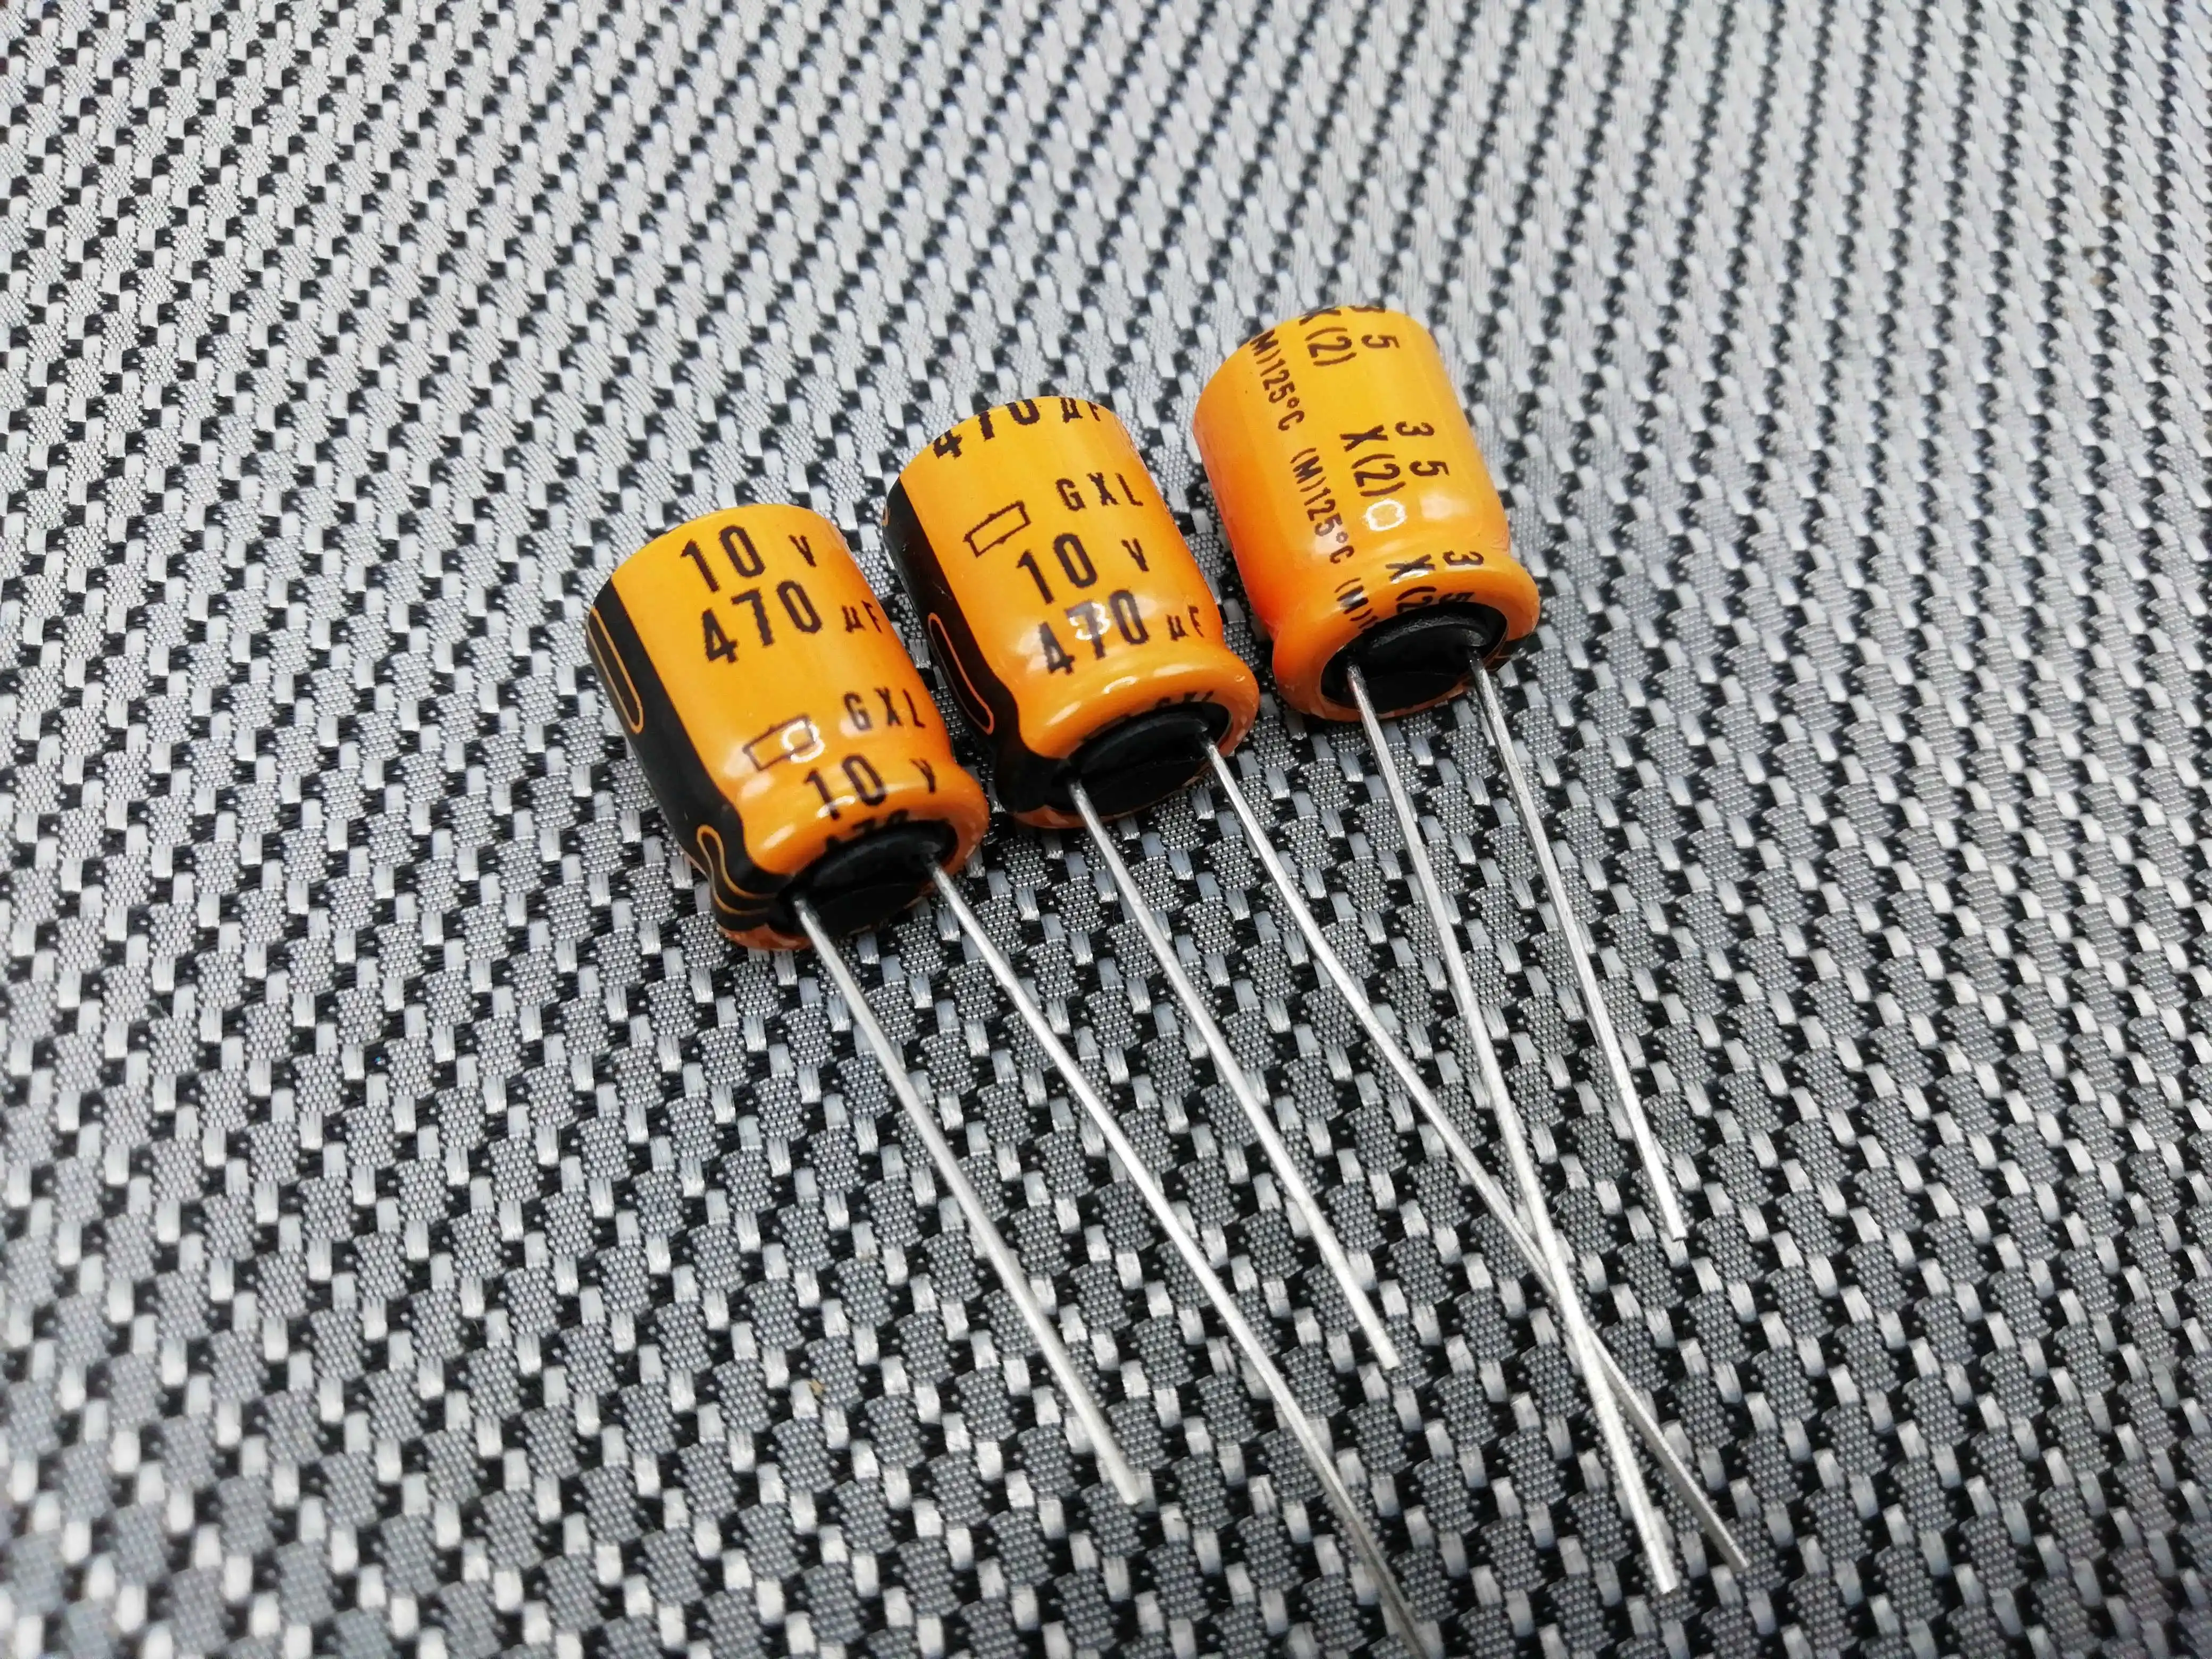 30pcs/lot original NIPPON Chemi-con GXL series 125C high frequency low resistance aluminum electrolytic capacitor free shipping